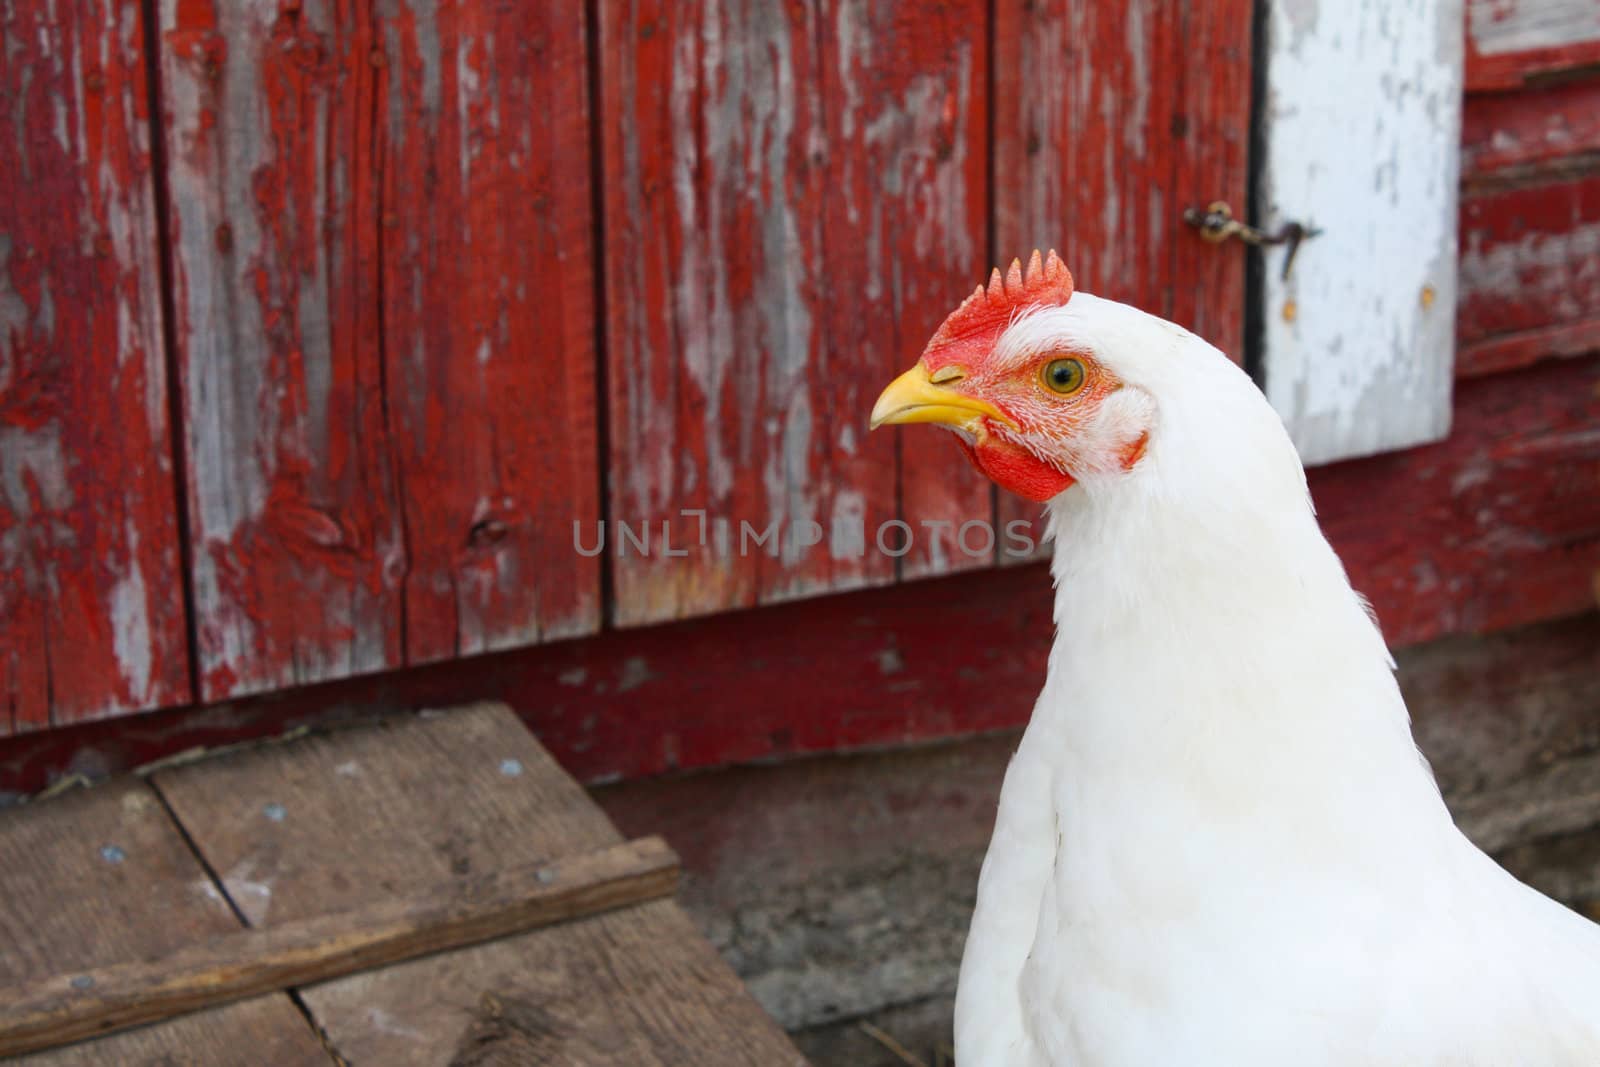 A single white hen with a shabby red barn with peeling paint in the background.